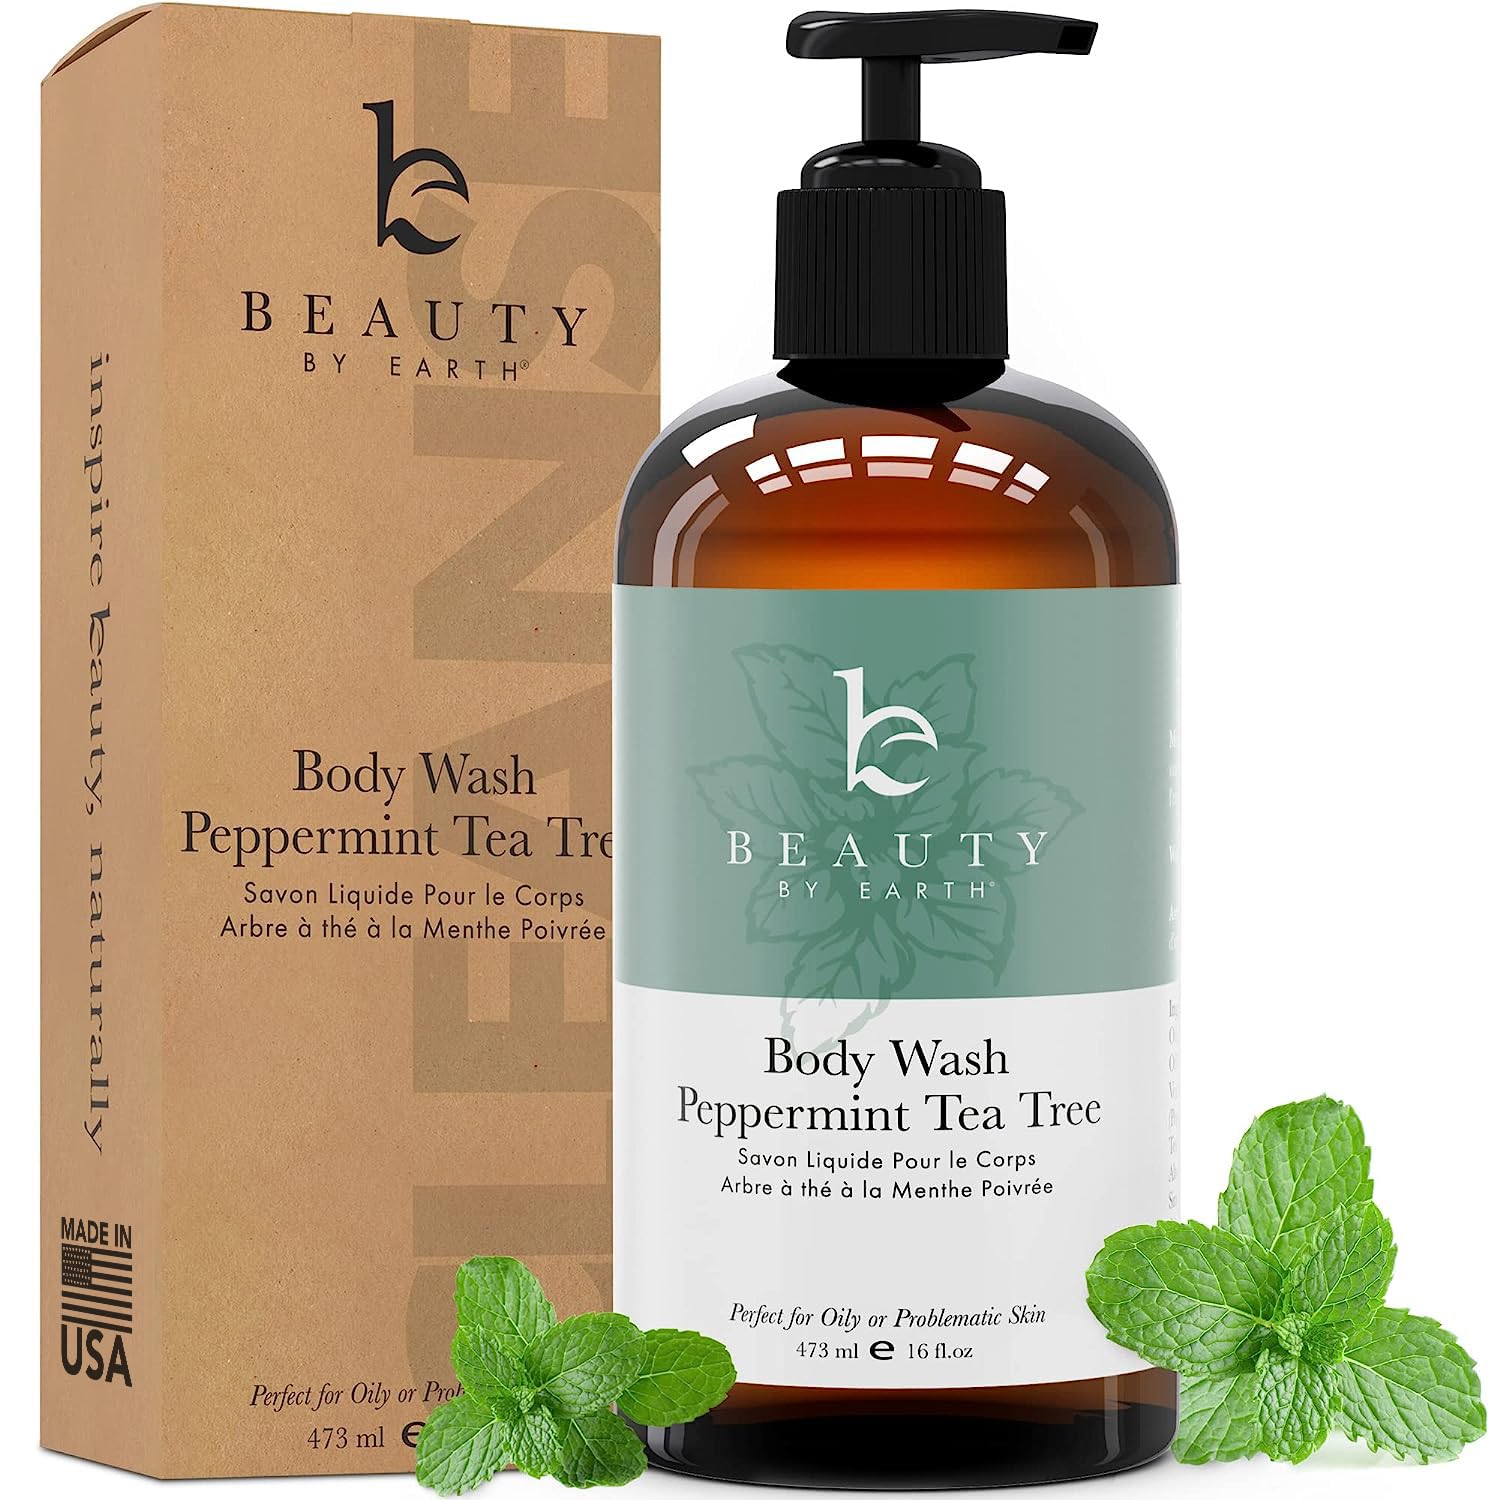 Beauty by Earth Peppermint Tea Tree Body Wash – Made with Organic Ingredients, Shower Gel for Men & Women, Tea Tree Soap for Oily or Problematic Skin, Helps Soothe Skin Blemishes